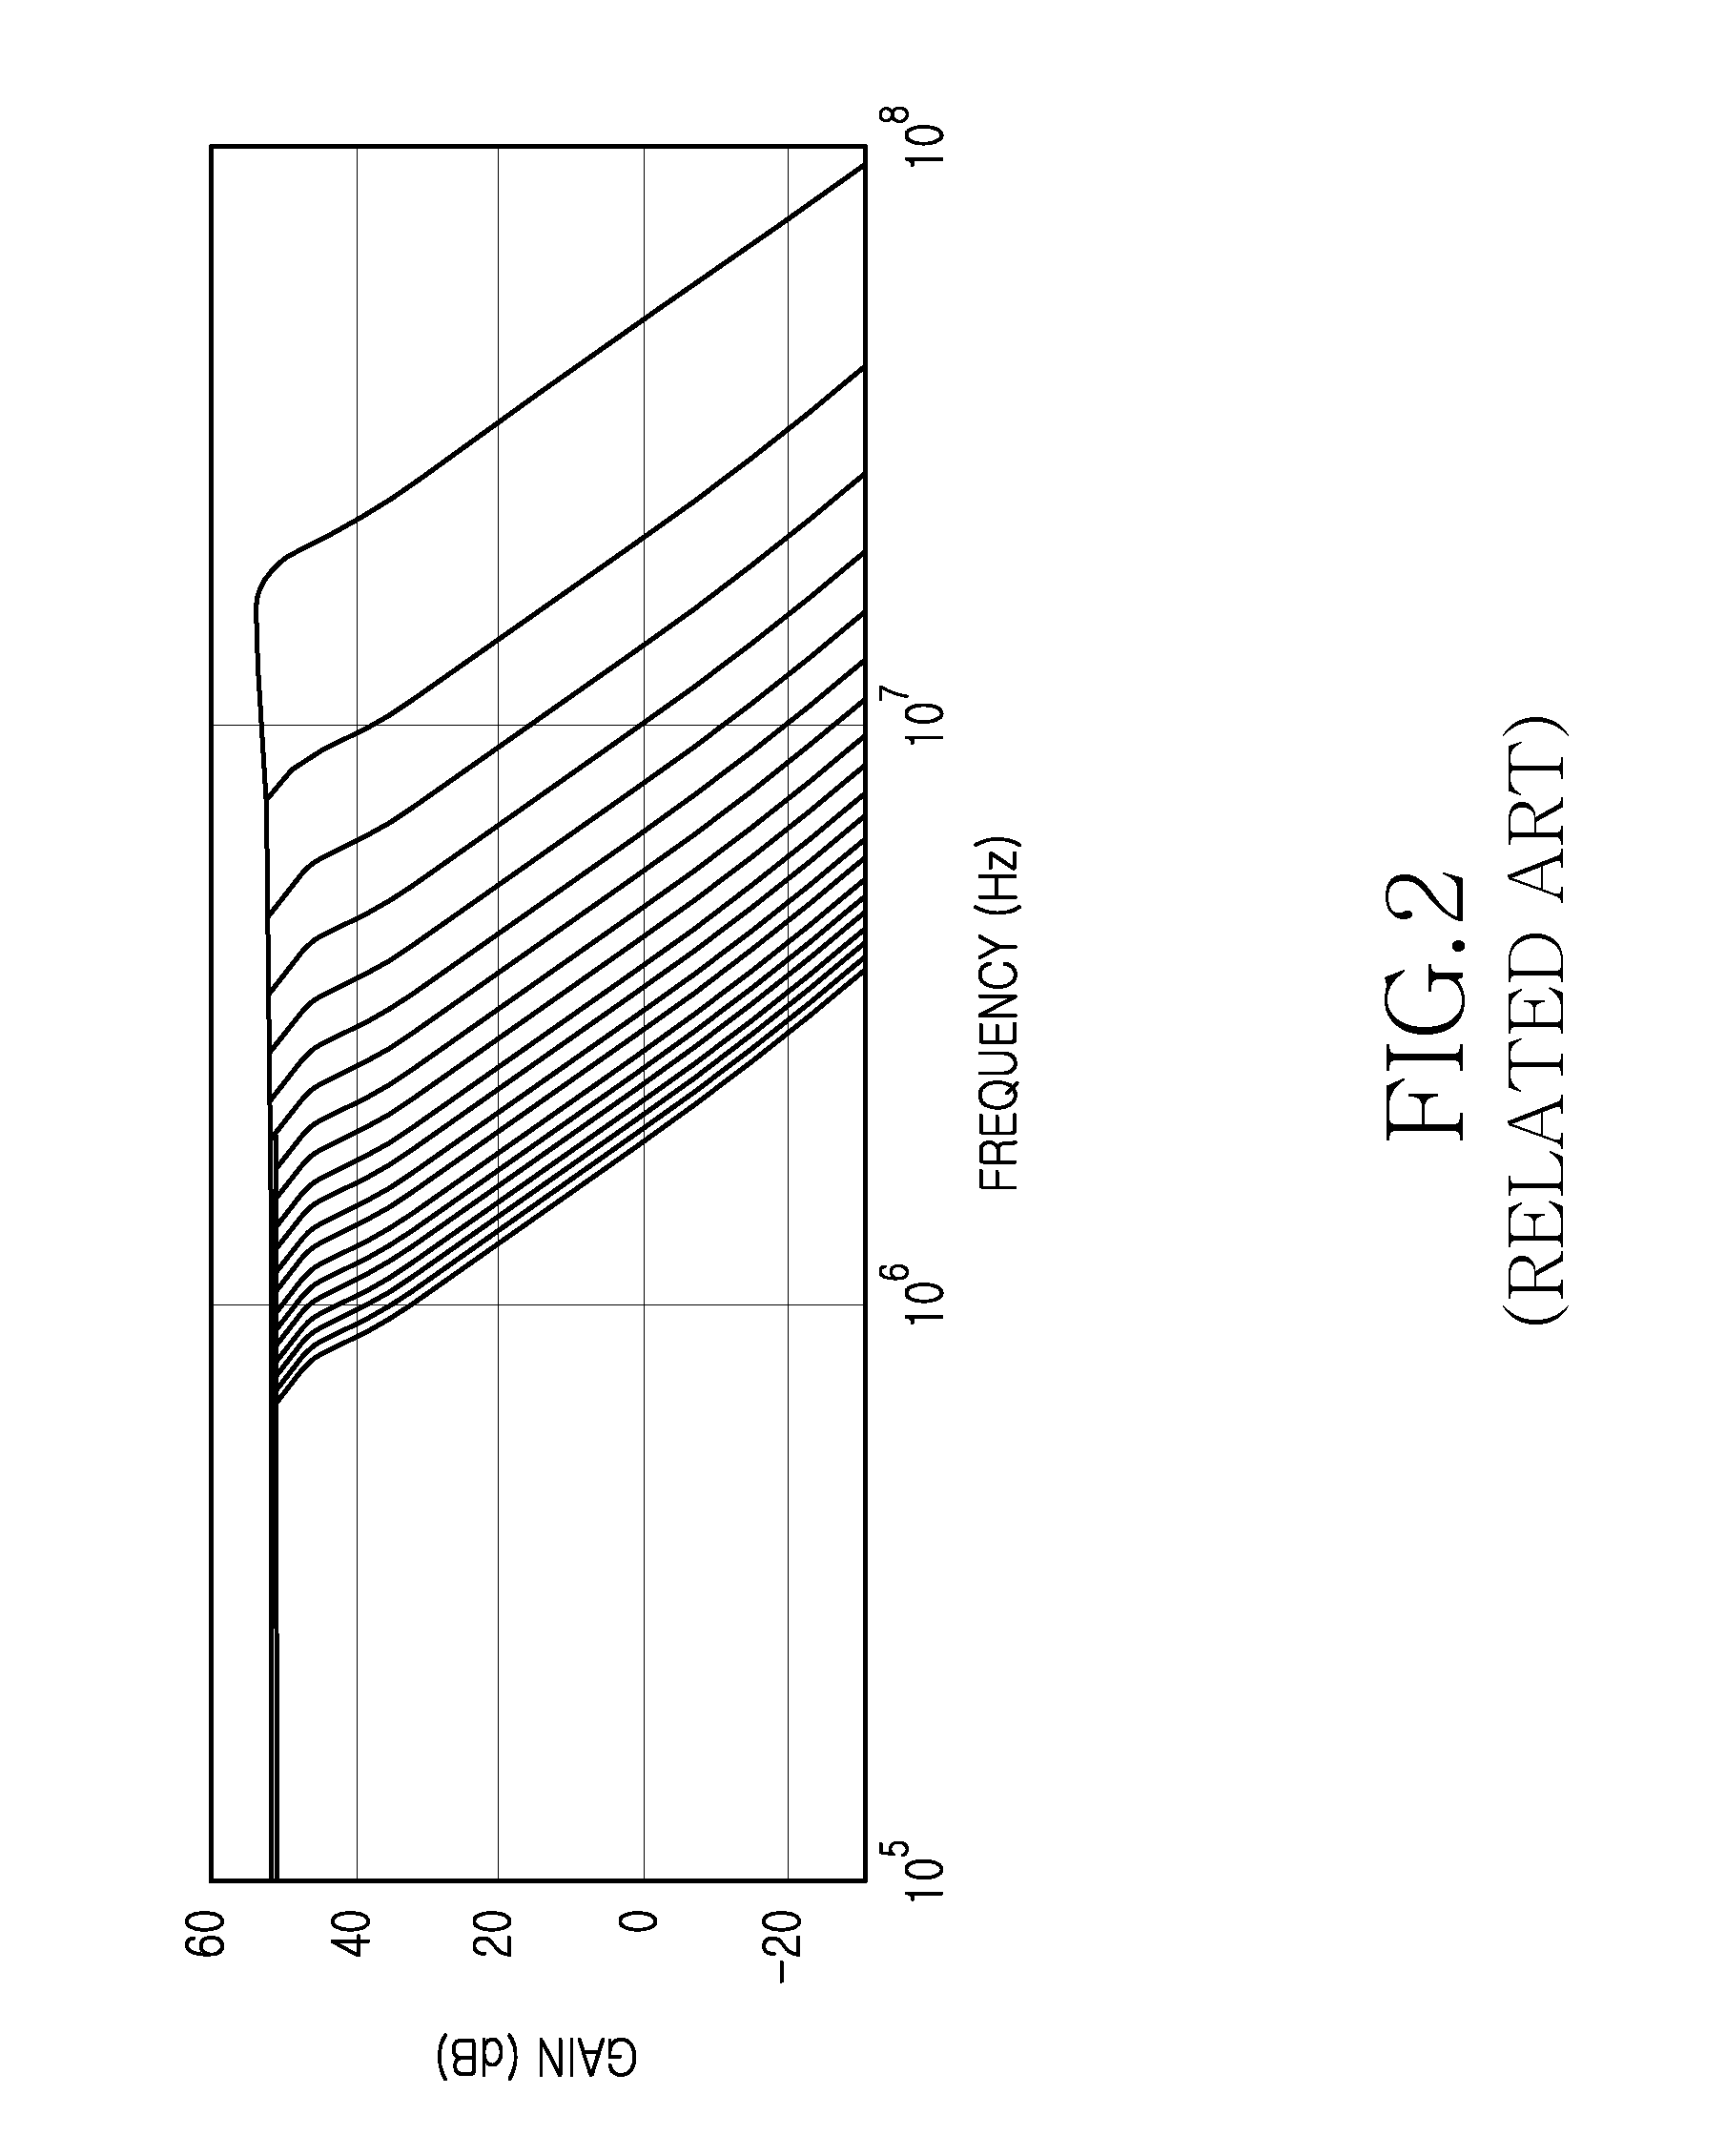 Amplifier and filter having variable gain and cutoff frequency controlled logarithmically according to digital code